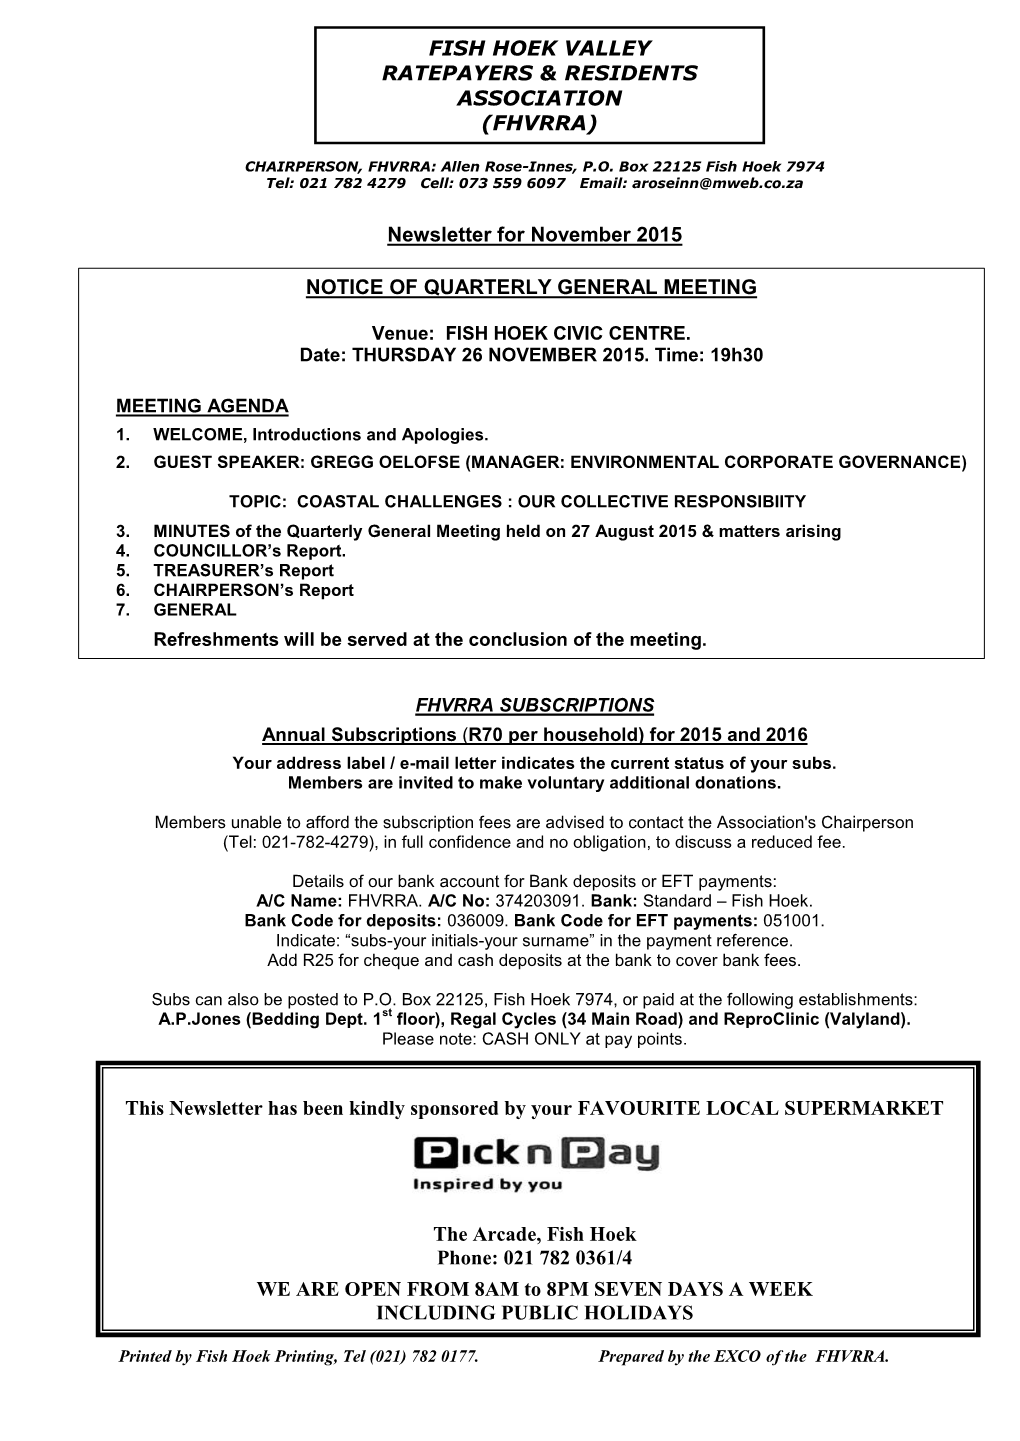 NOTICE of QUARTERLY GENERAL MEETING Newsletter for November 2015 This Newsletter Has Been Kindly Sponsored by Your FAVOURITE L